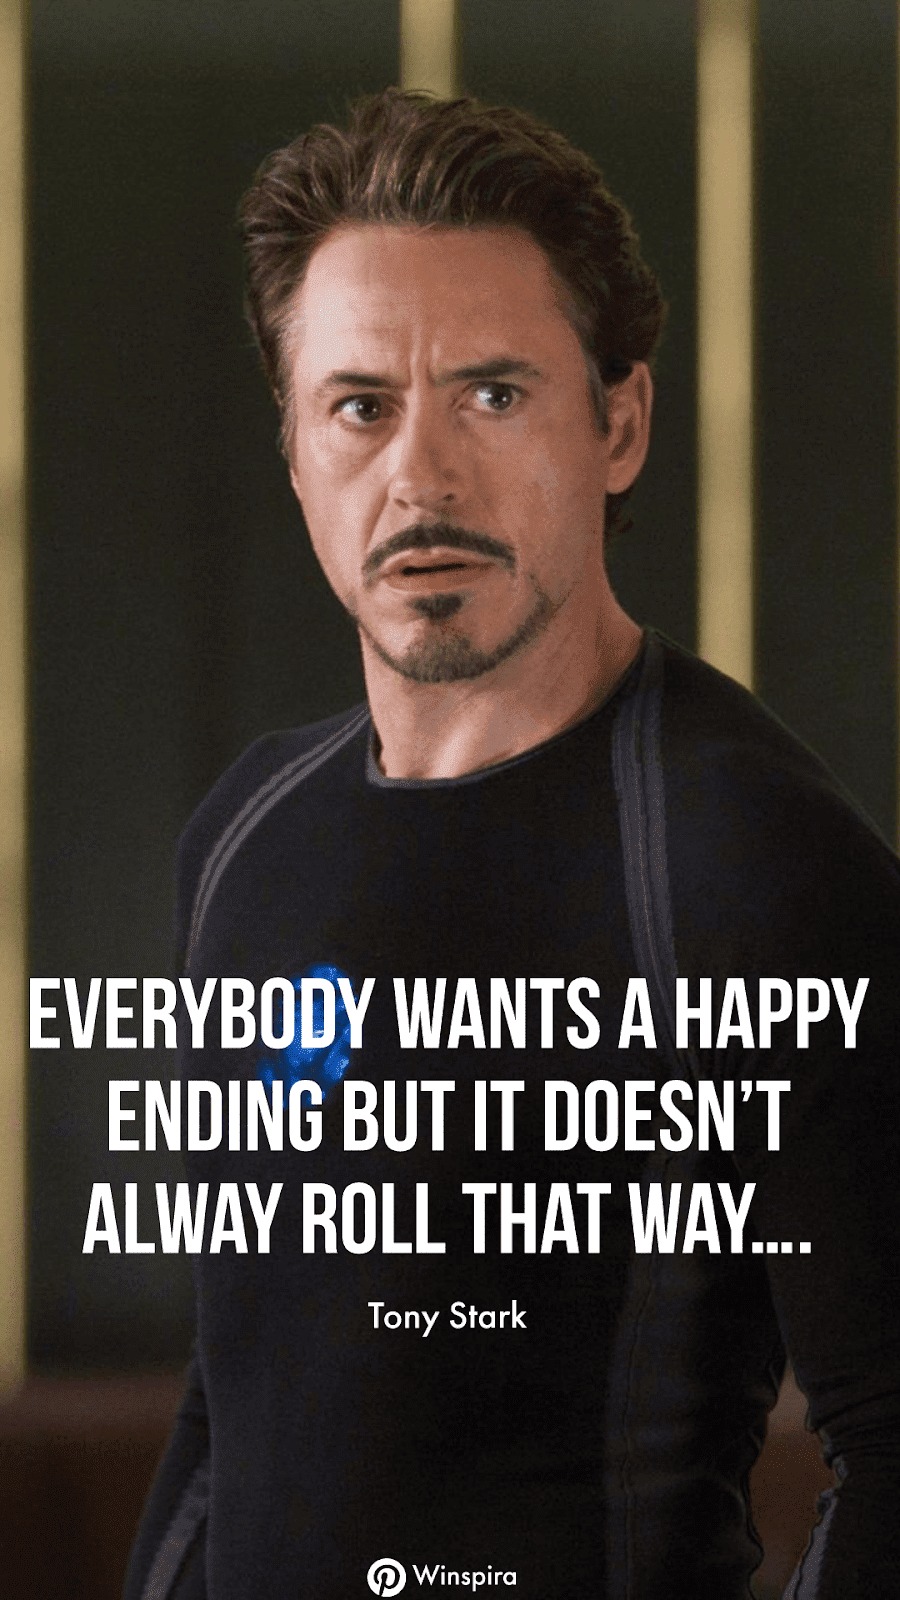 Tony Stark Motivational And Hilarious Quotes, The Avengers: End Game